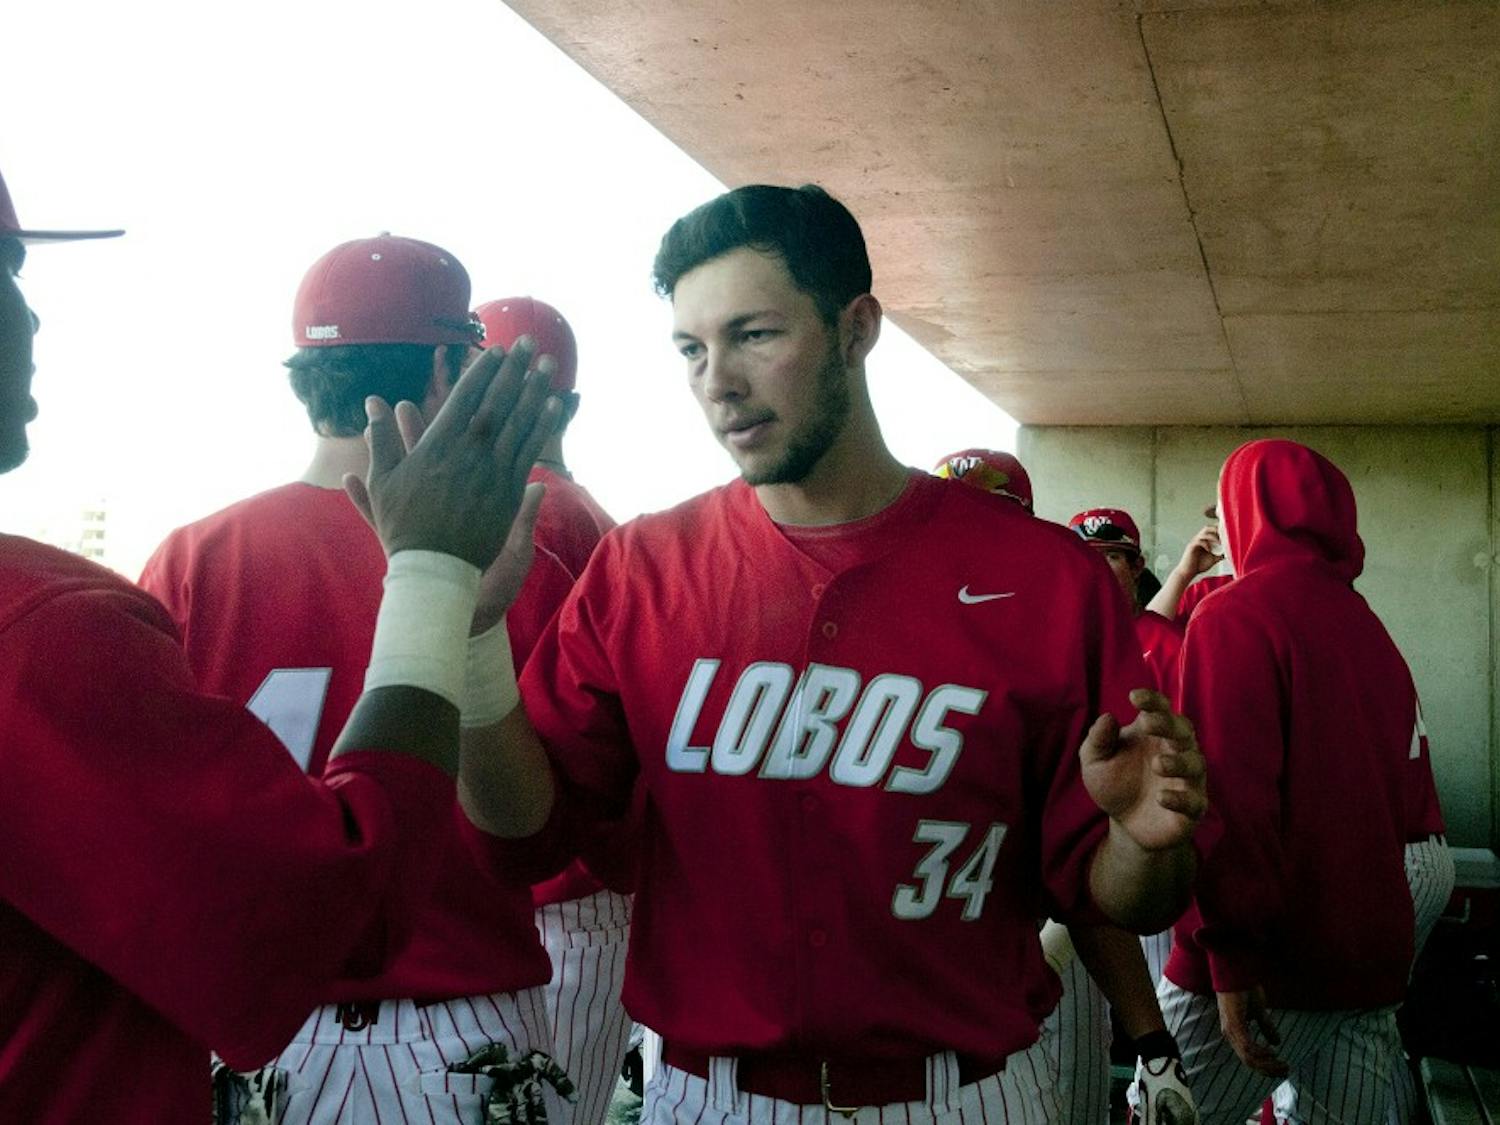 	First baseman Ryan Padilla gives his teammates a high-five during the Northern Illinois game on Sunday. The Lobos defeated Missouri State 7-0 then tied Northern Illinois 3-3. It was UNM’s first tie since 2004 against Northwestern.